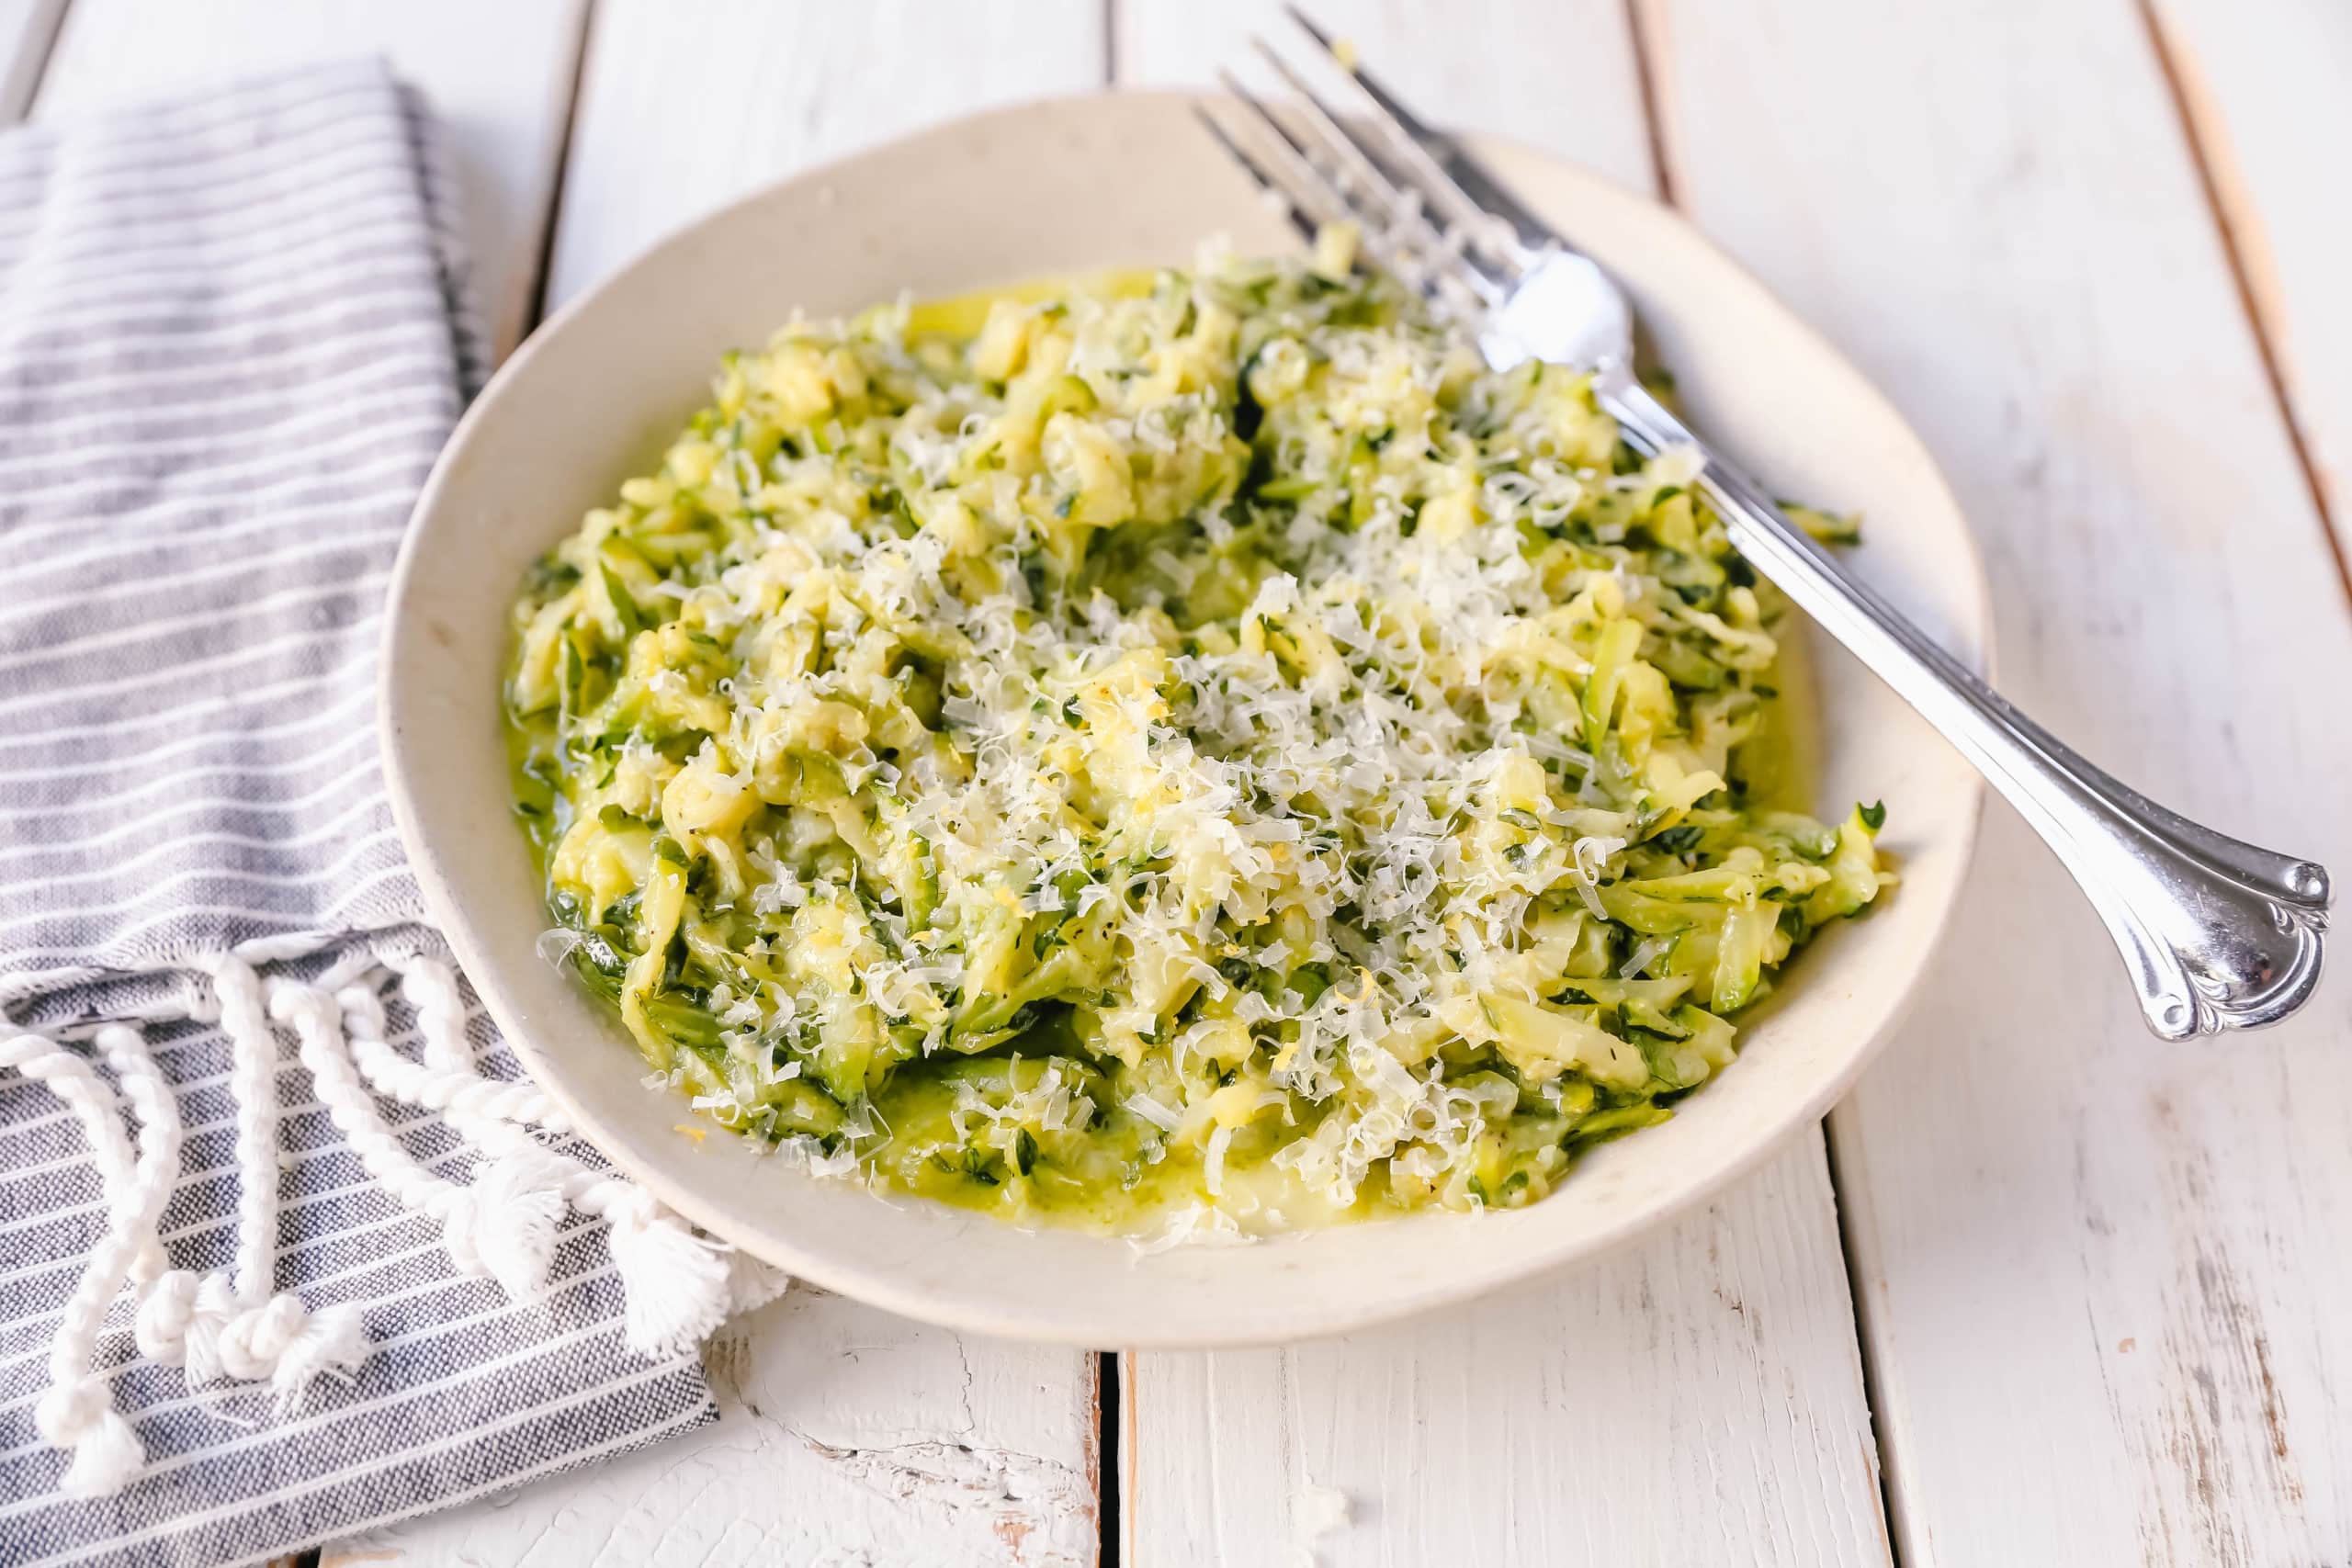 Shredded Sautéed Zucchini with Parmesan. Simple shredded fresh zucchini sauteed until tender and topped with salt, pepper, garlic, and parmesan cheese. This zucchini recipe pairs so well with beef and chicken. #zucchini #sidedish #vegetables